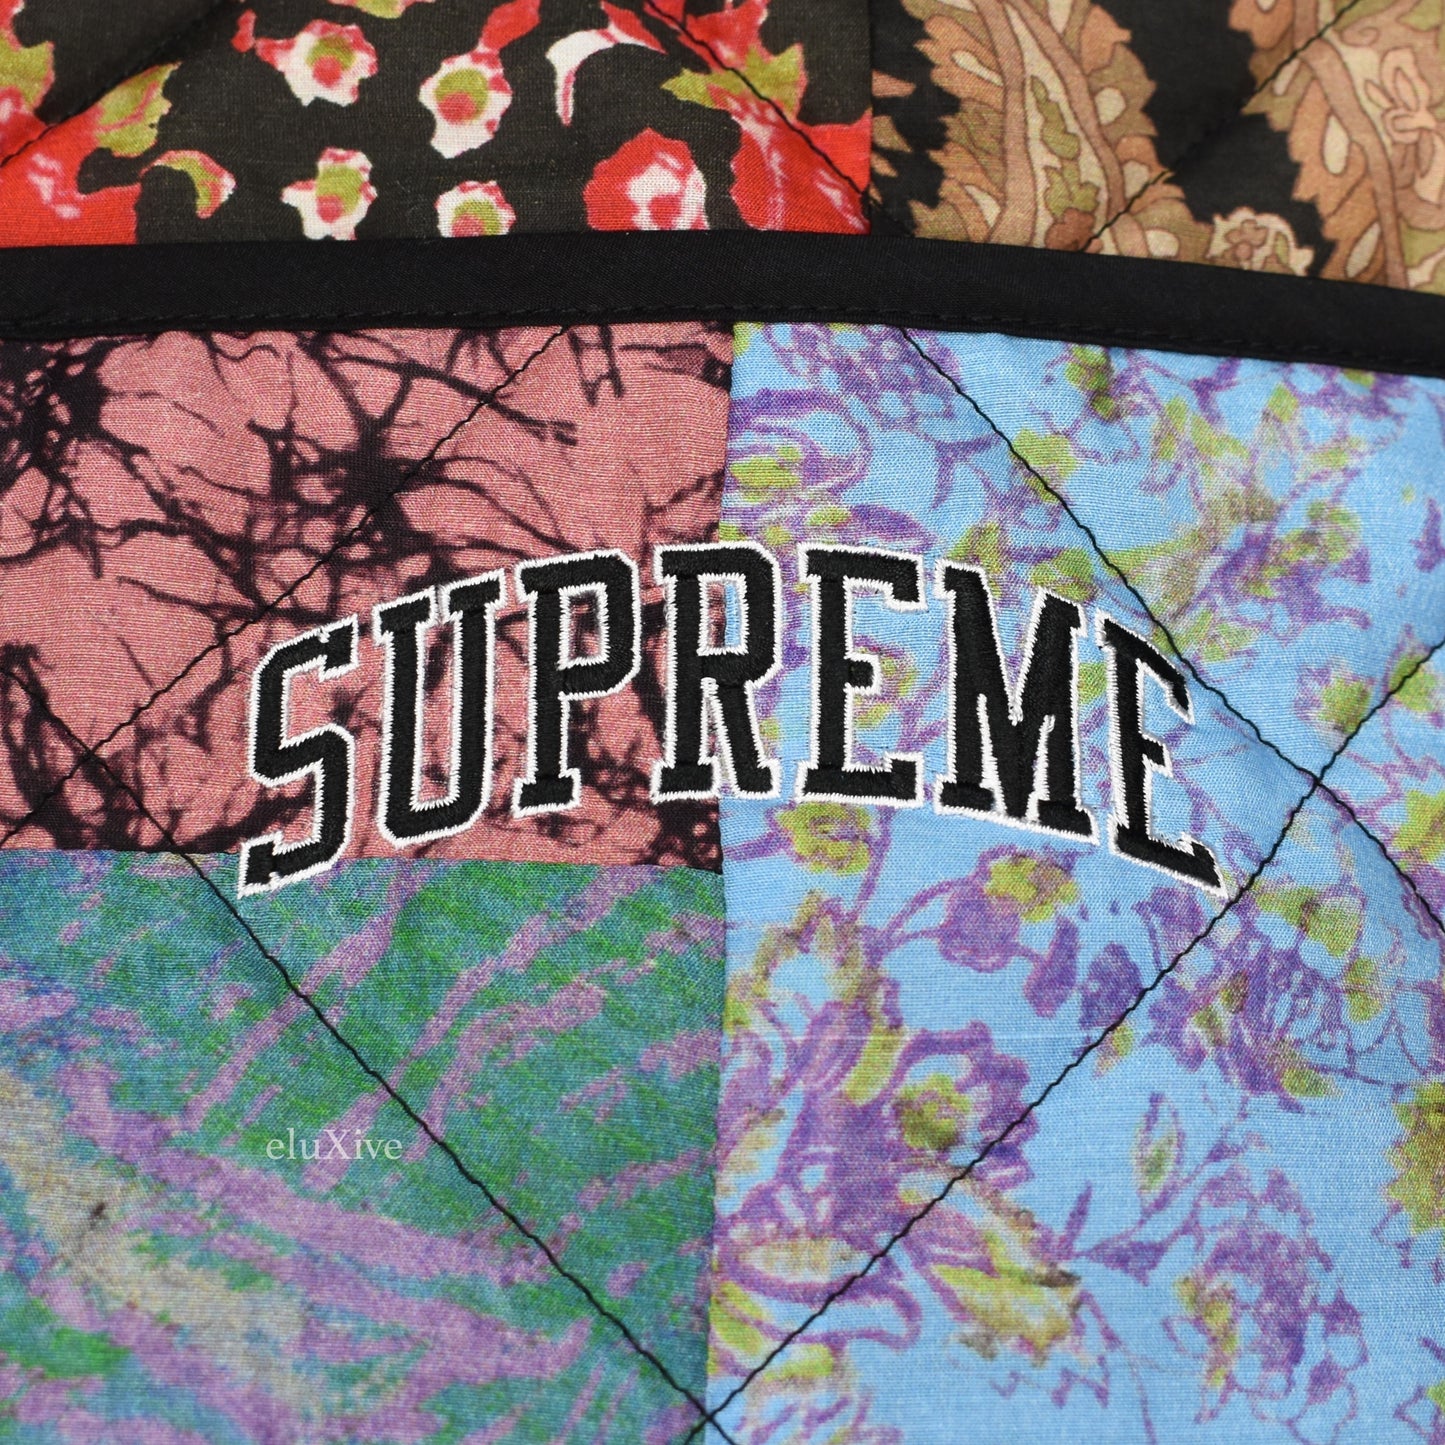 Supreme - Reversible Patchwork Quilted Jacket